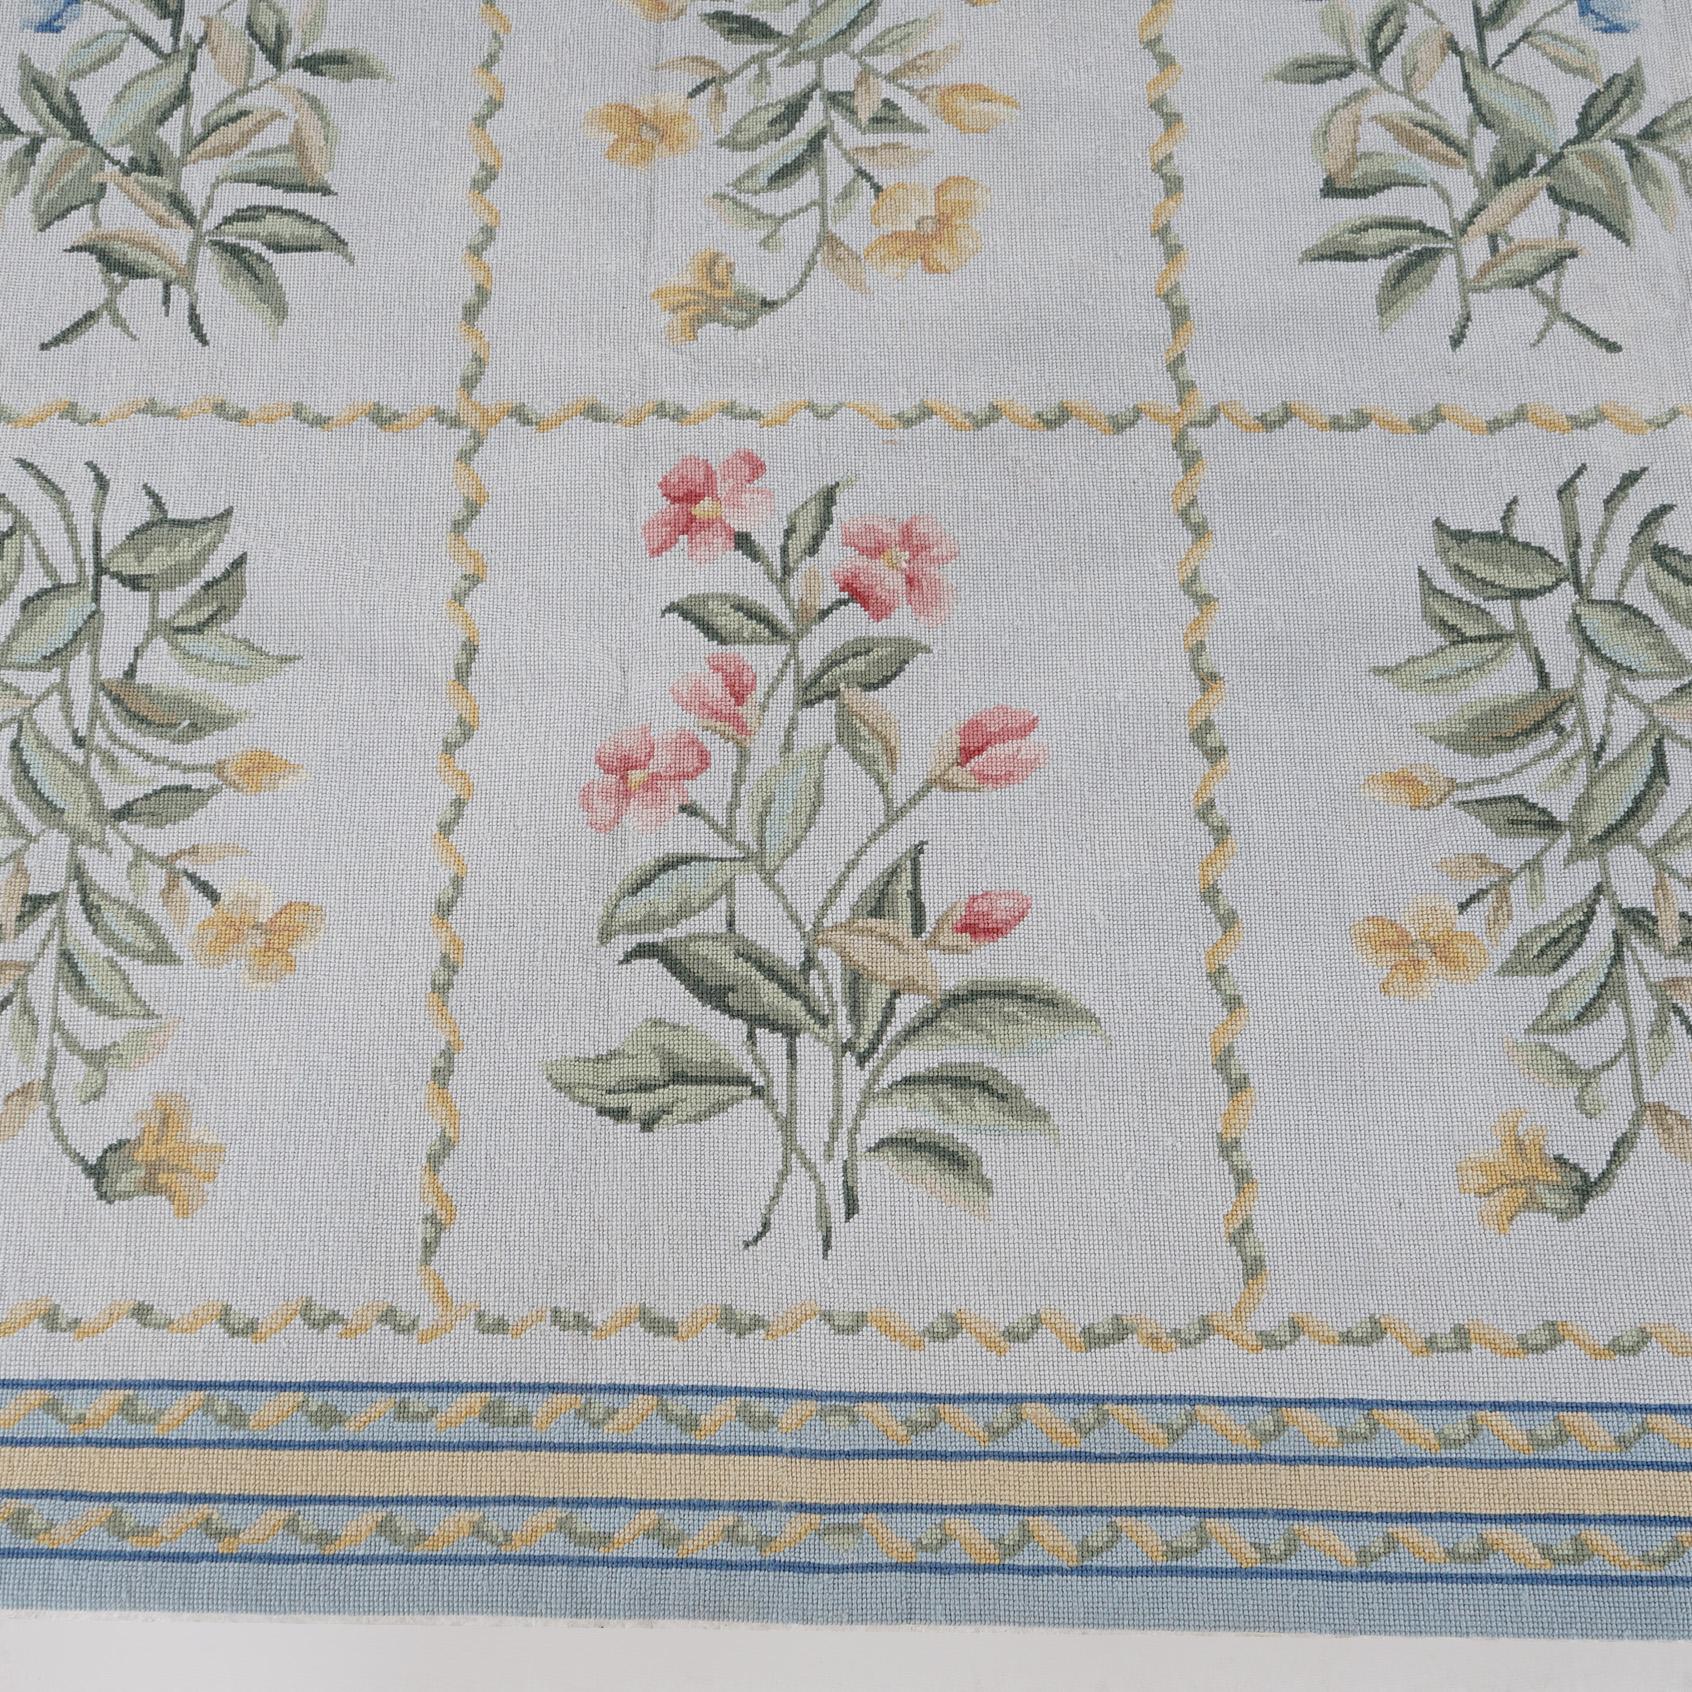 20th Century French Aubusson Needlepoint Room Size Paneled Floral Garden Wool Rug 20th C